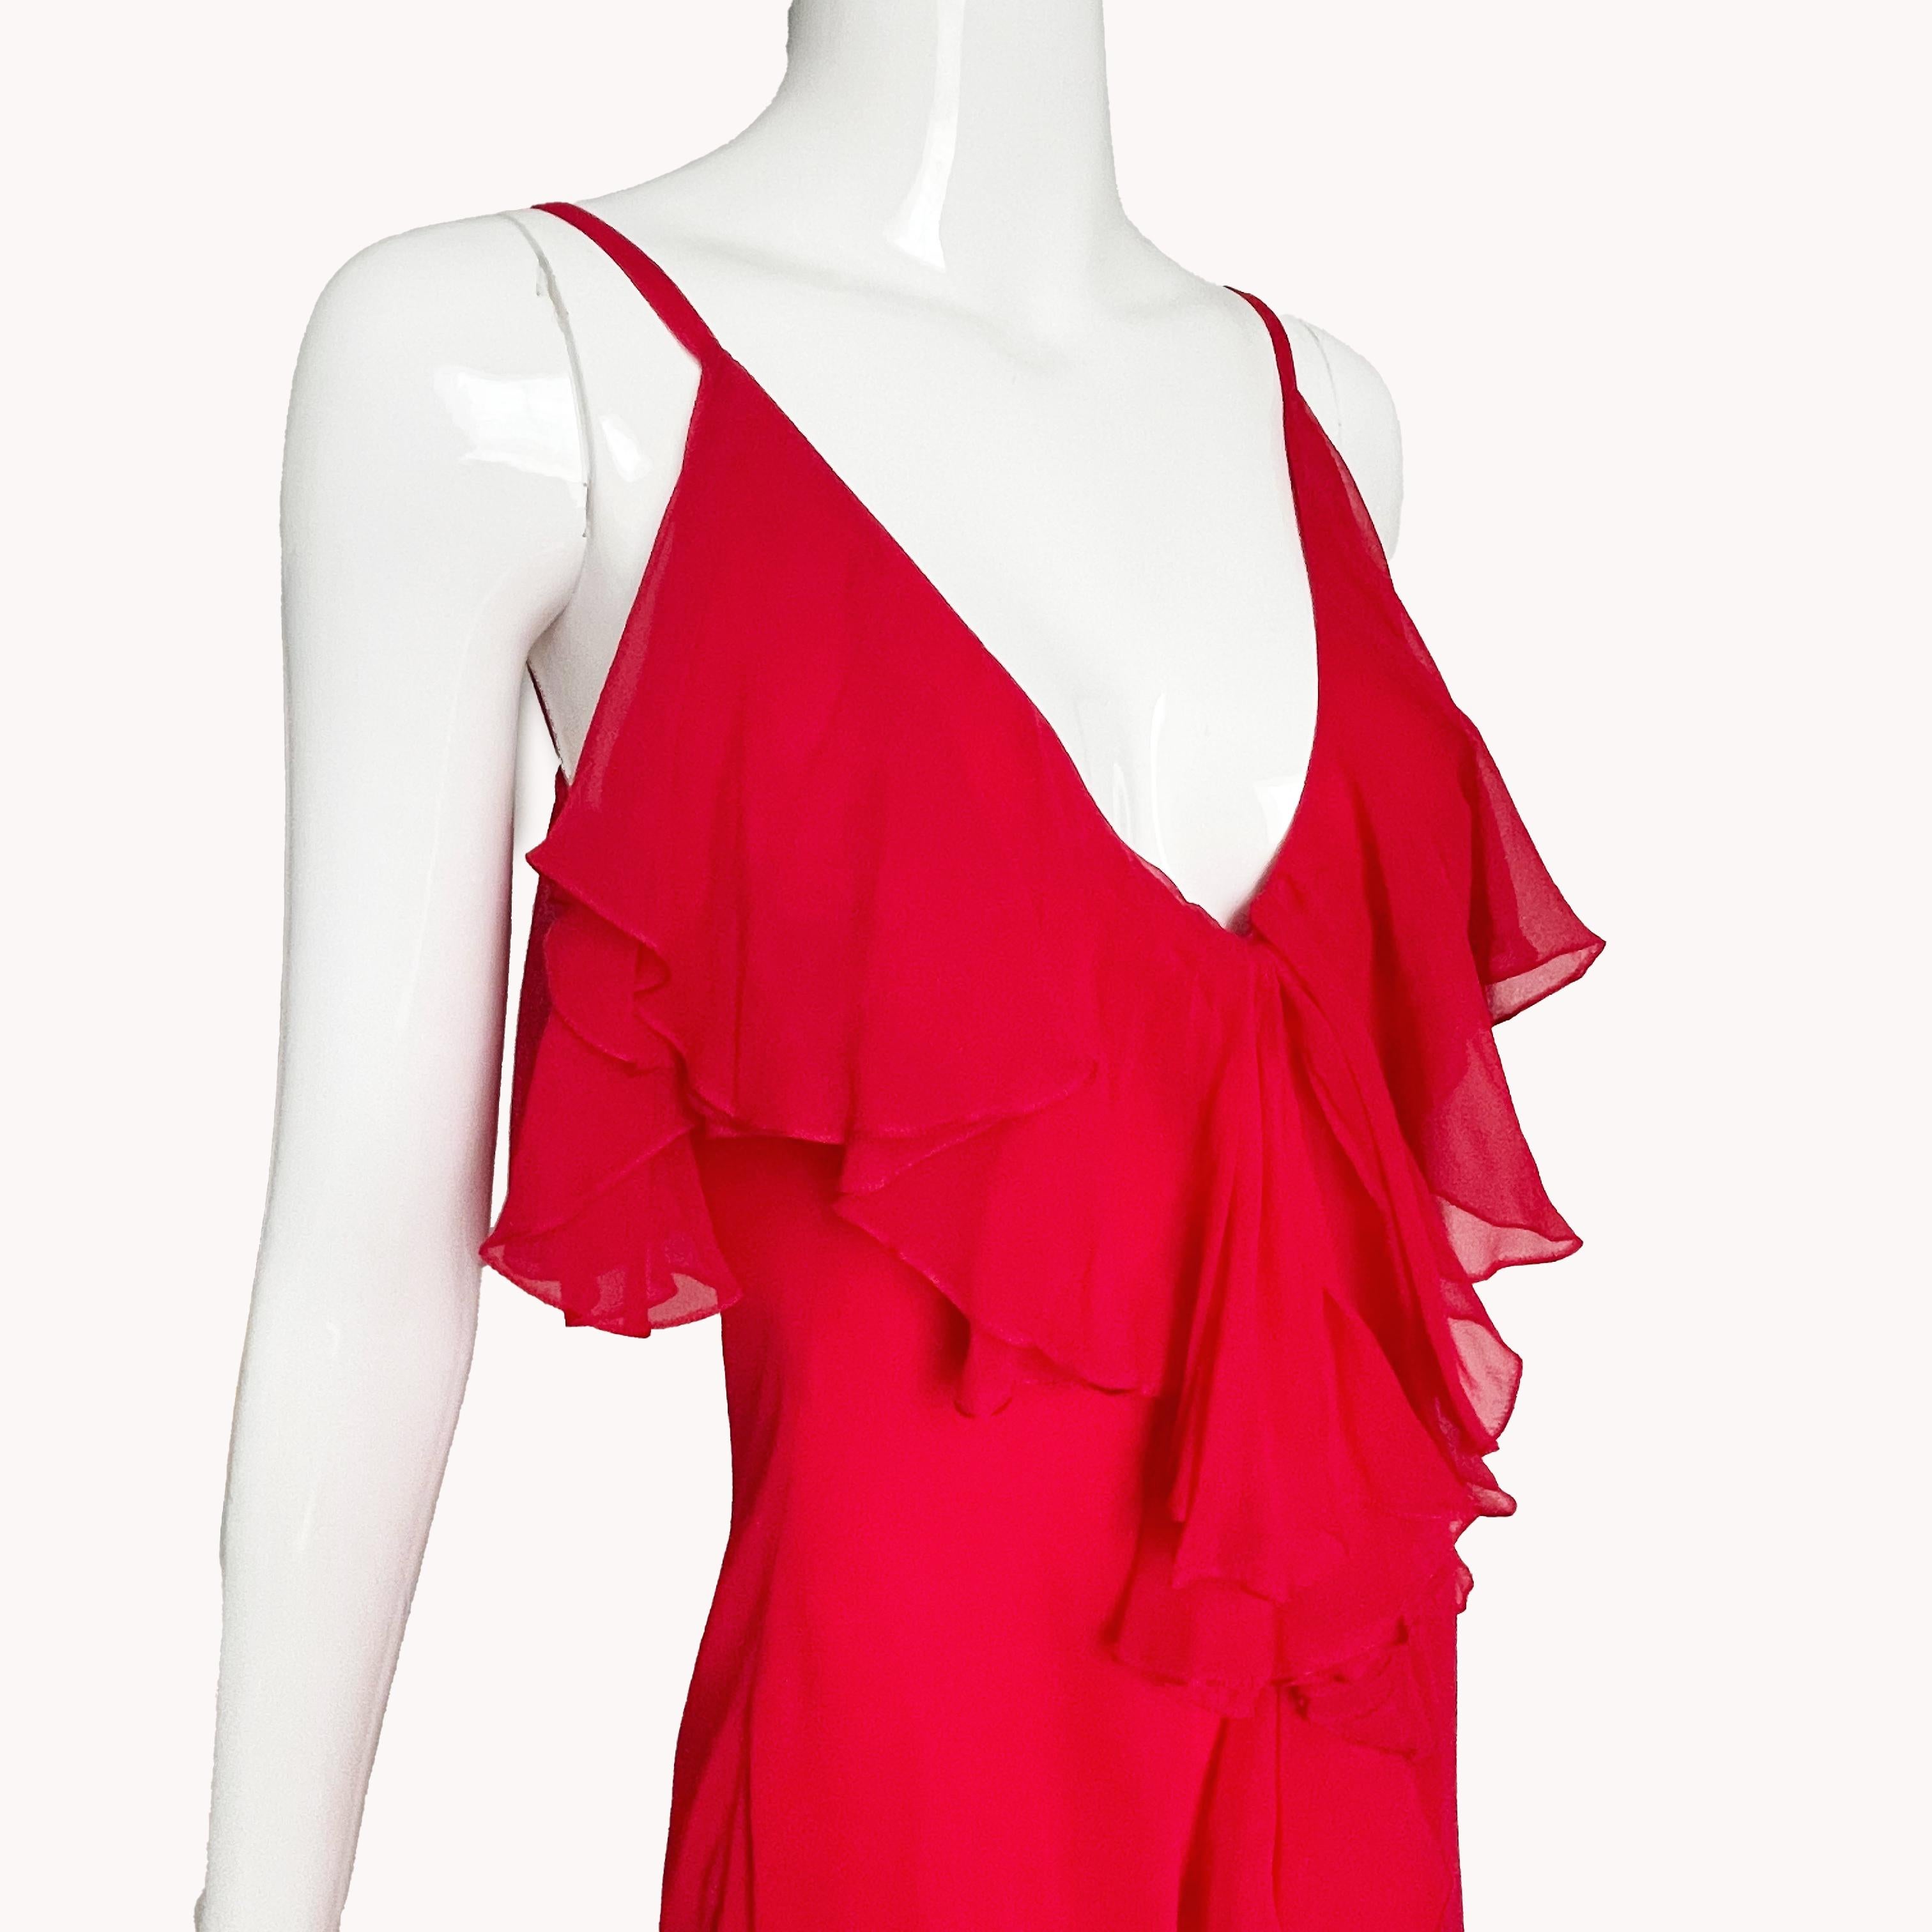 Pauline Trigere Dress and Shawl 2pc Set Red Silk Chiffon Loose Ruffles Vintage For Sale 1